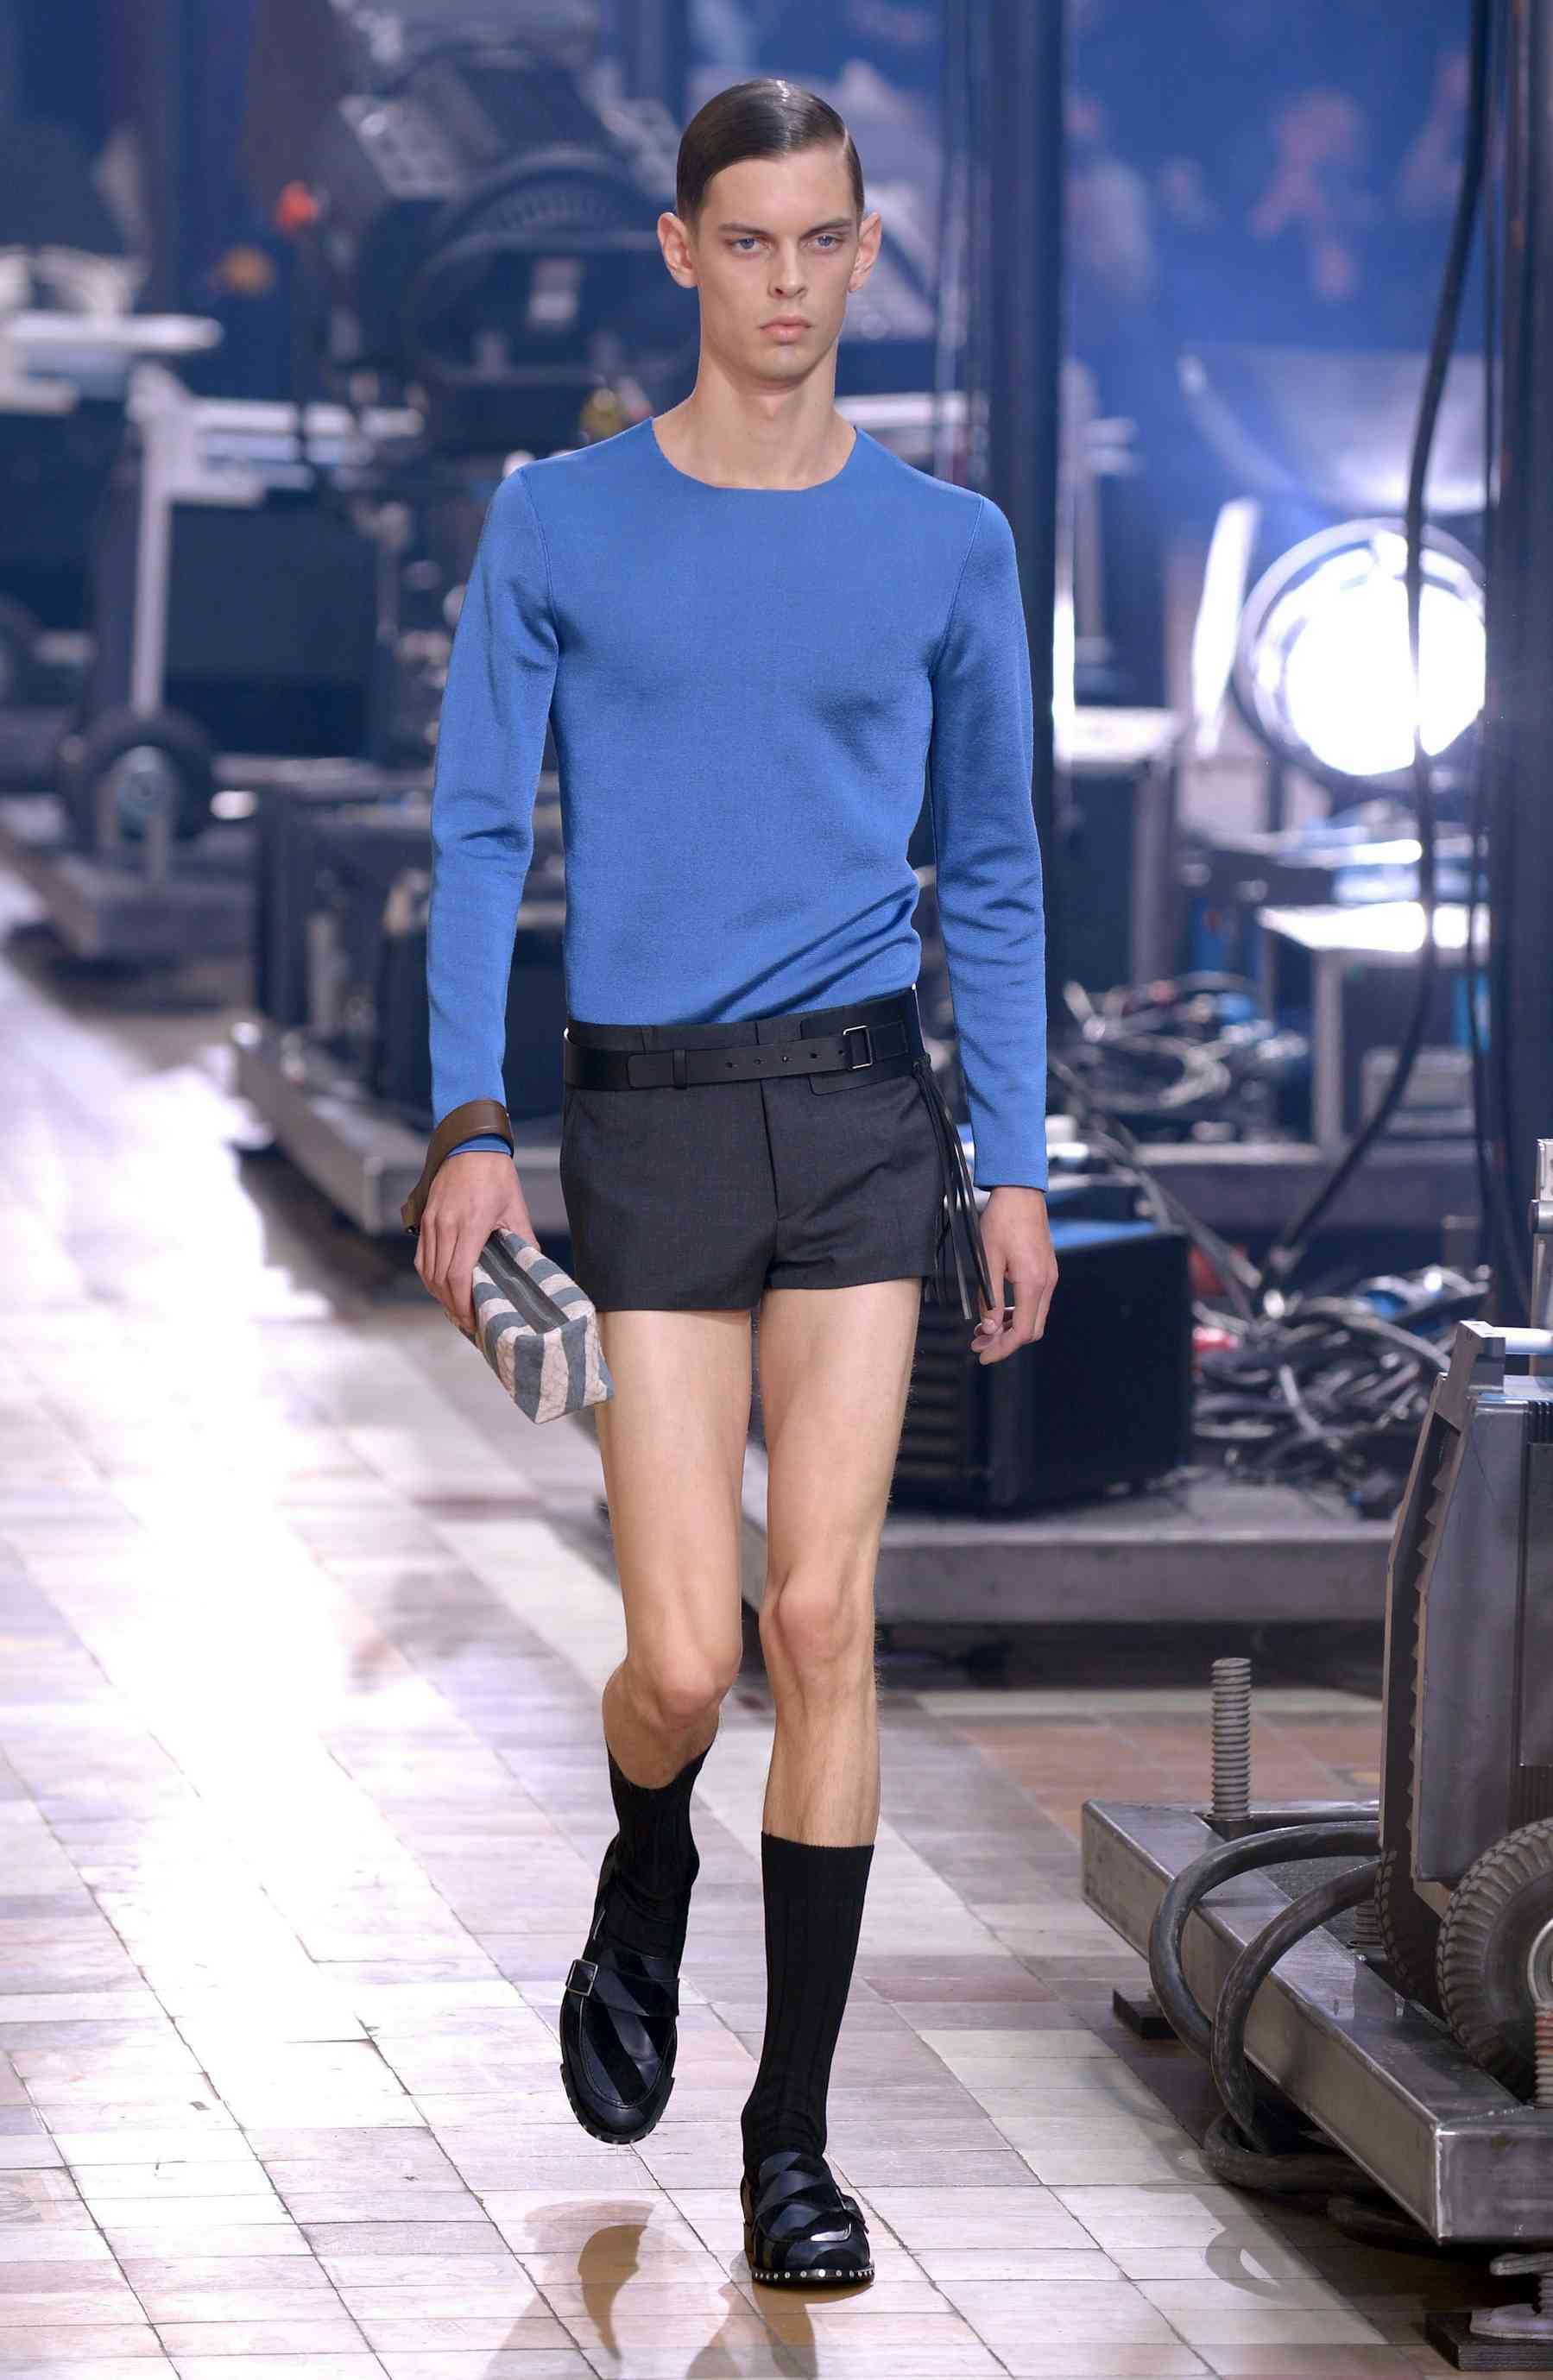 men-s-shorts-are-getting-shorter-and-should-be-worn-with-pride